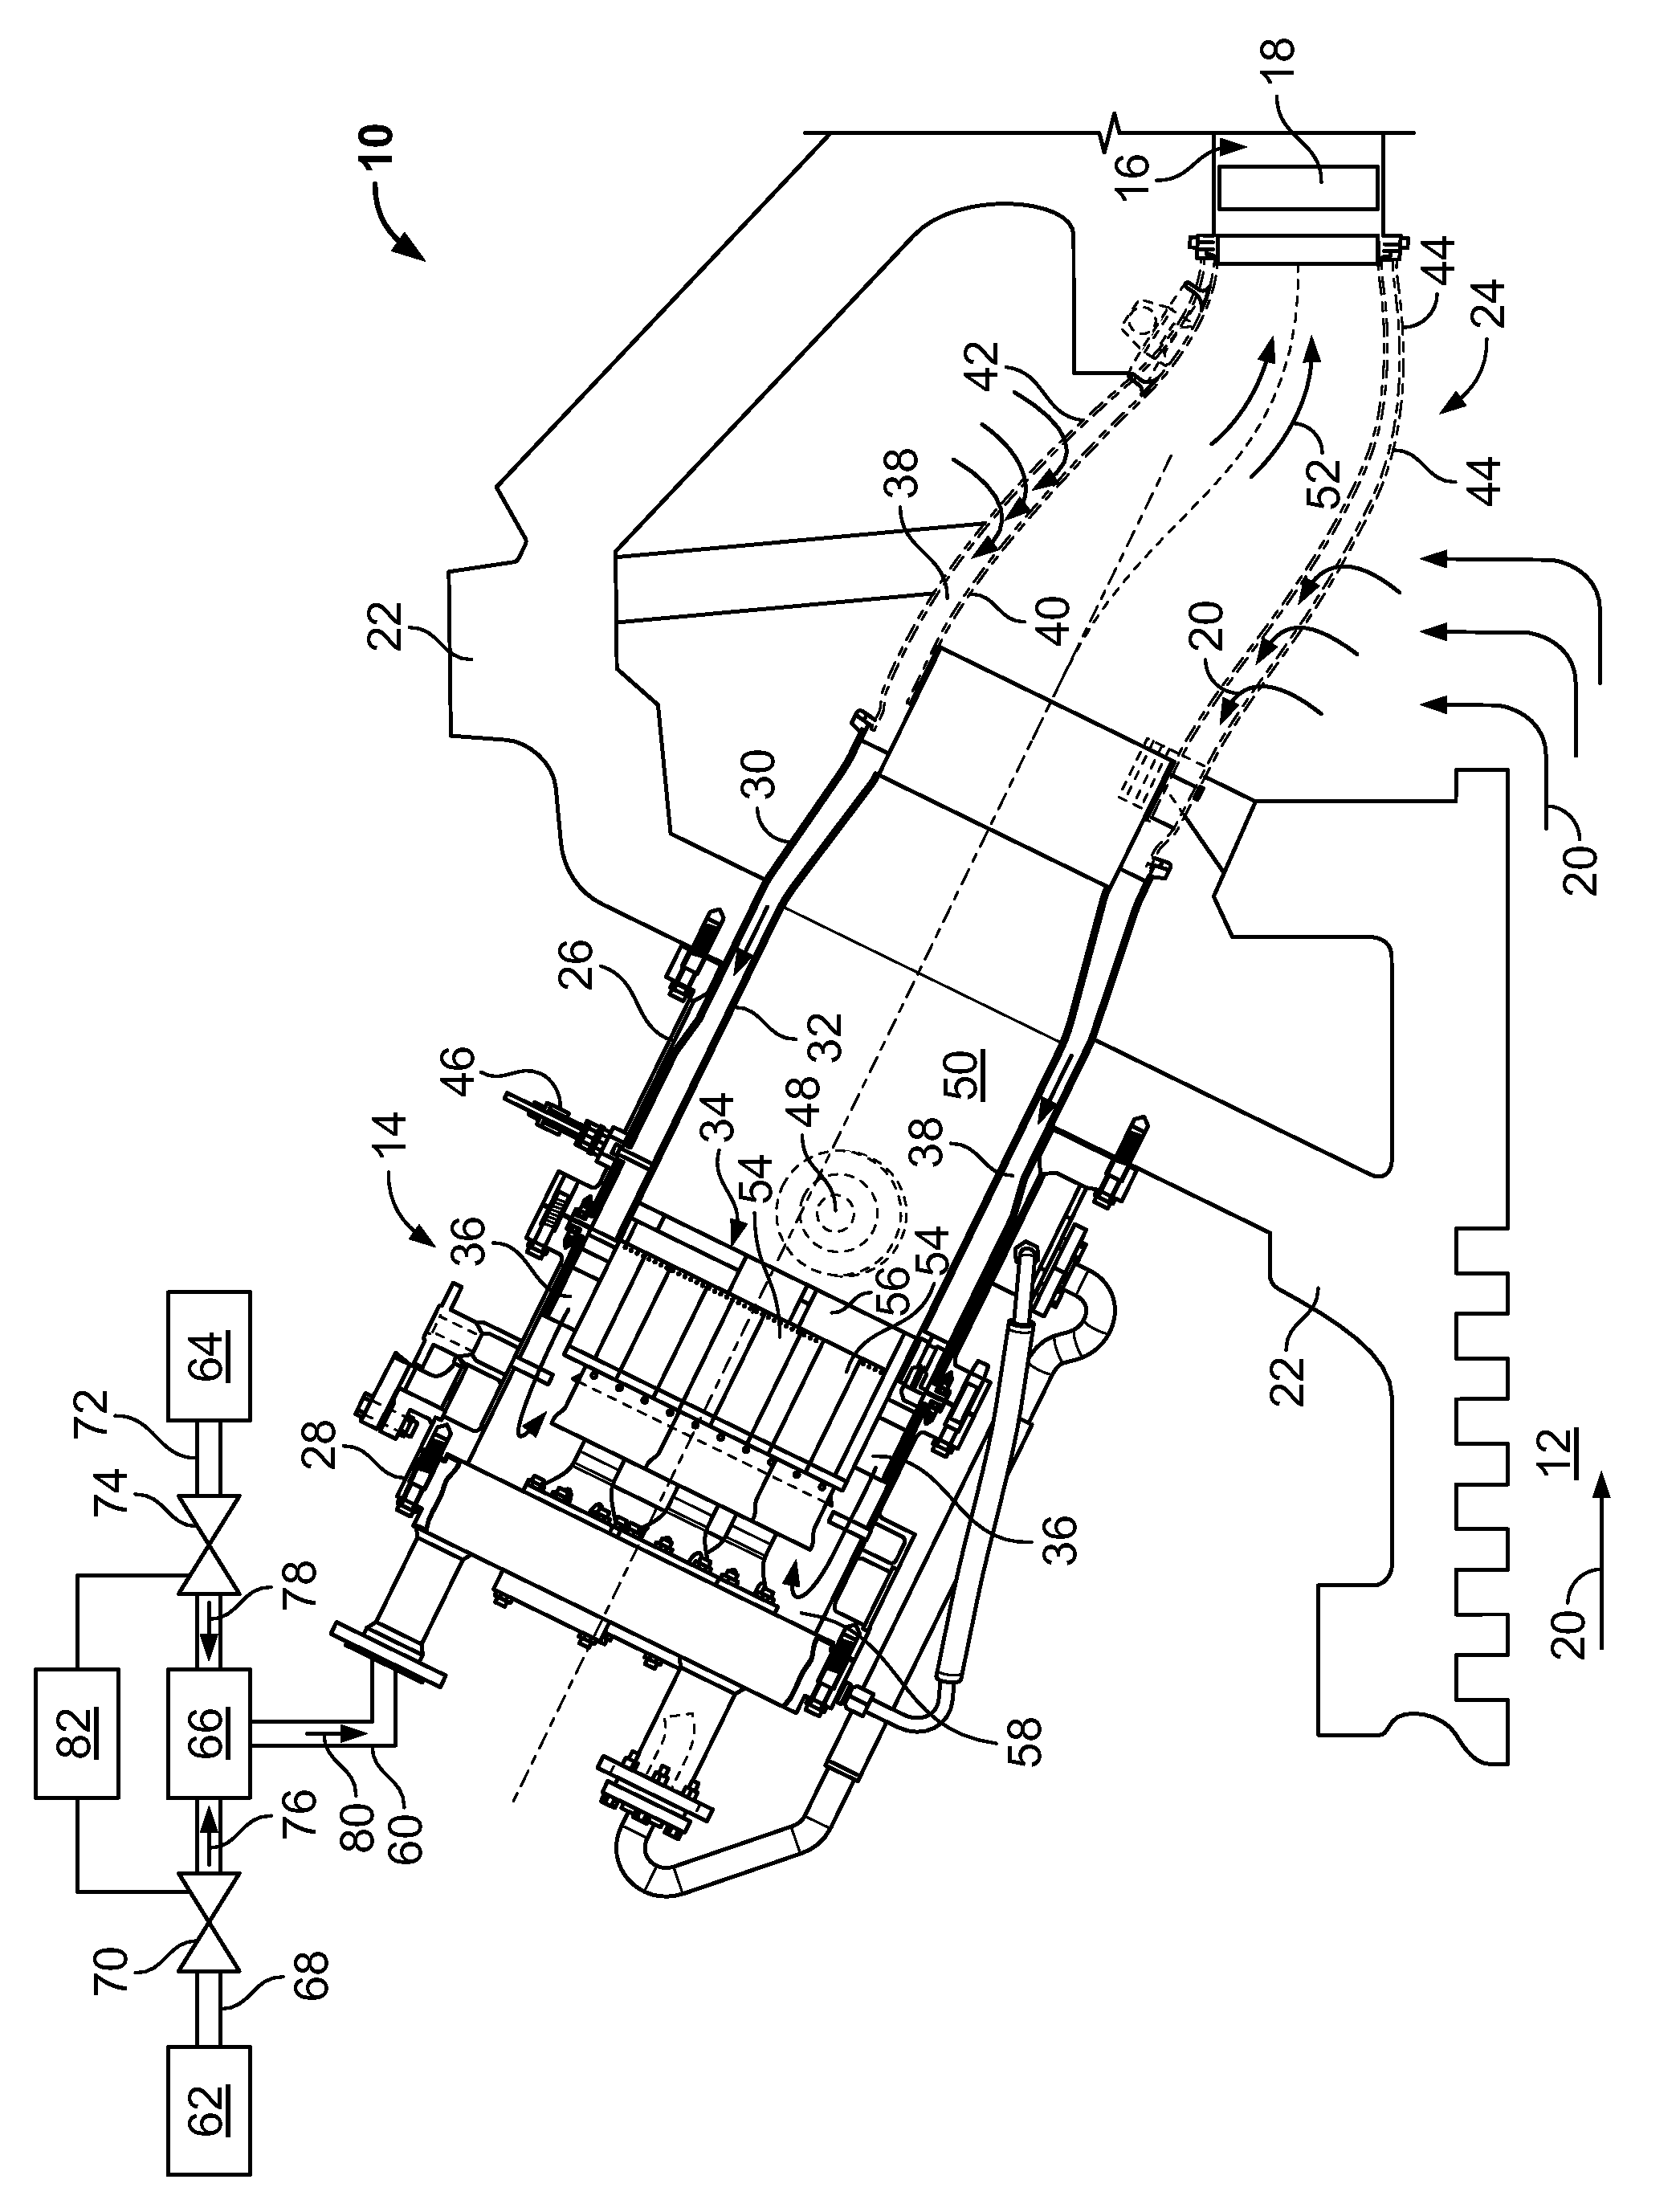 Method and apparatus for combusting syngas within a combustor